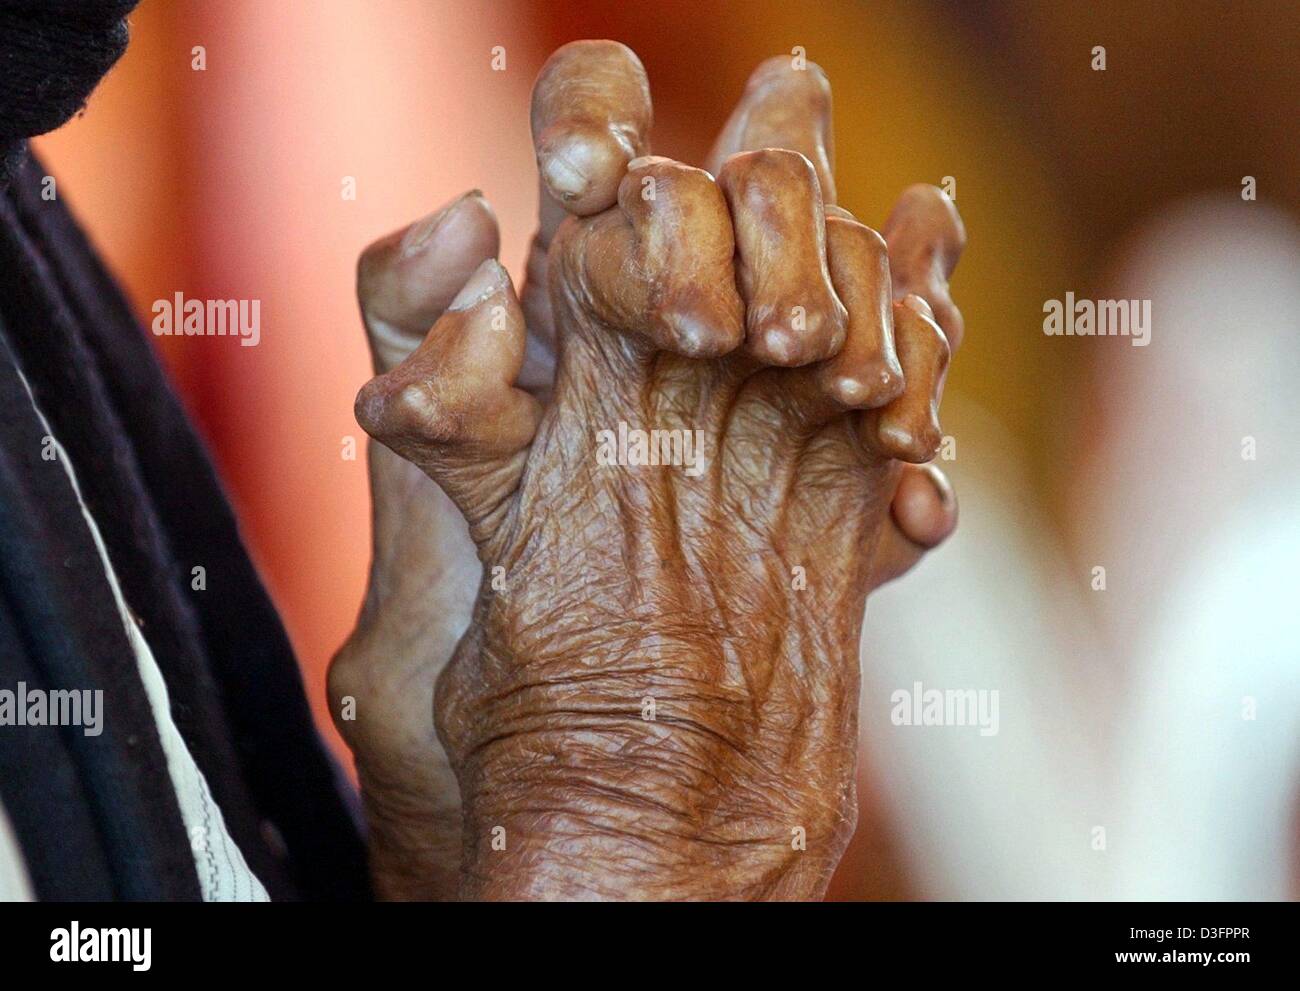 (dpa) - The hands of 70-year-old Nazir Alam who is marked with Lepra, photographed at the Lepra center in Jaipur, India, 2 March 2003. Nazir Alam has established the centre with German aid. Stock Photo